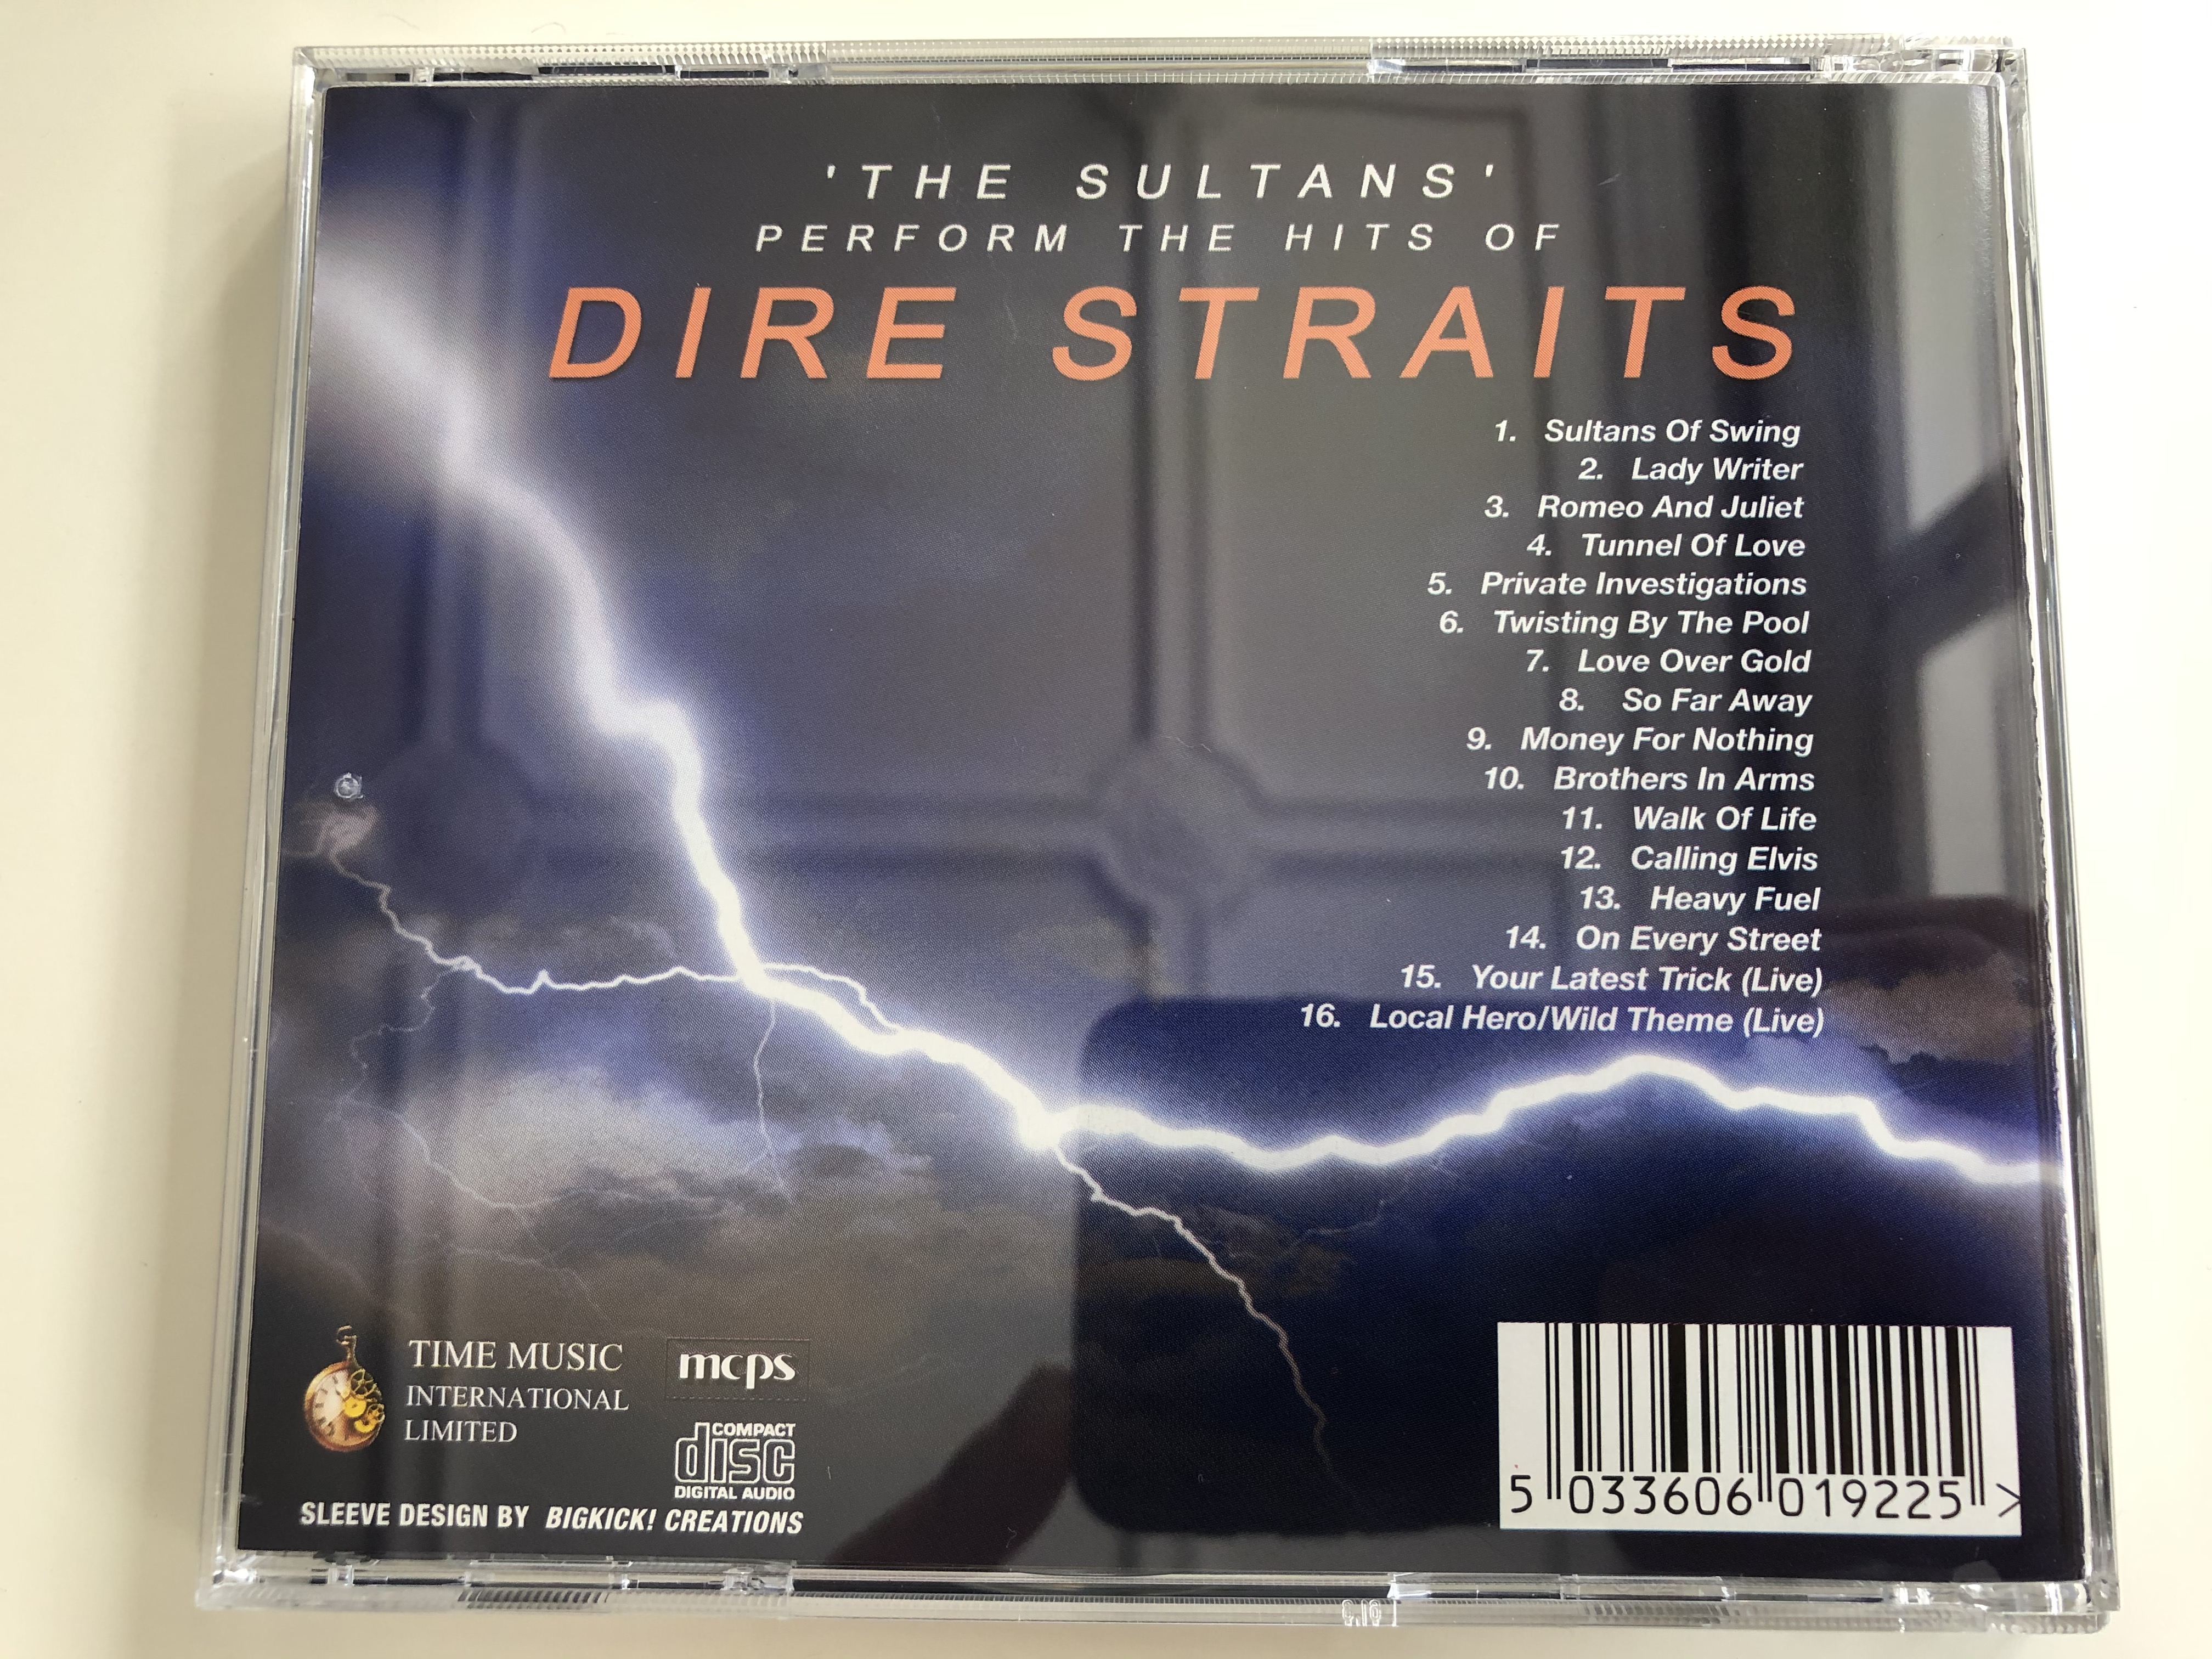 -the-sultans-perform-the-hits-of-dire-straits-sultans-of-swing-money-for-nothing-private-investigations-and-many-more-time-music-international-ltd.-audio-cd-2001-tmi192-5-.jpg